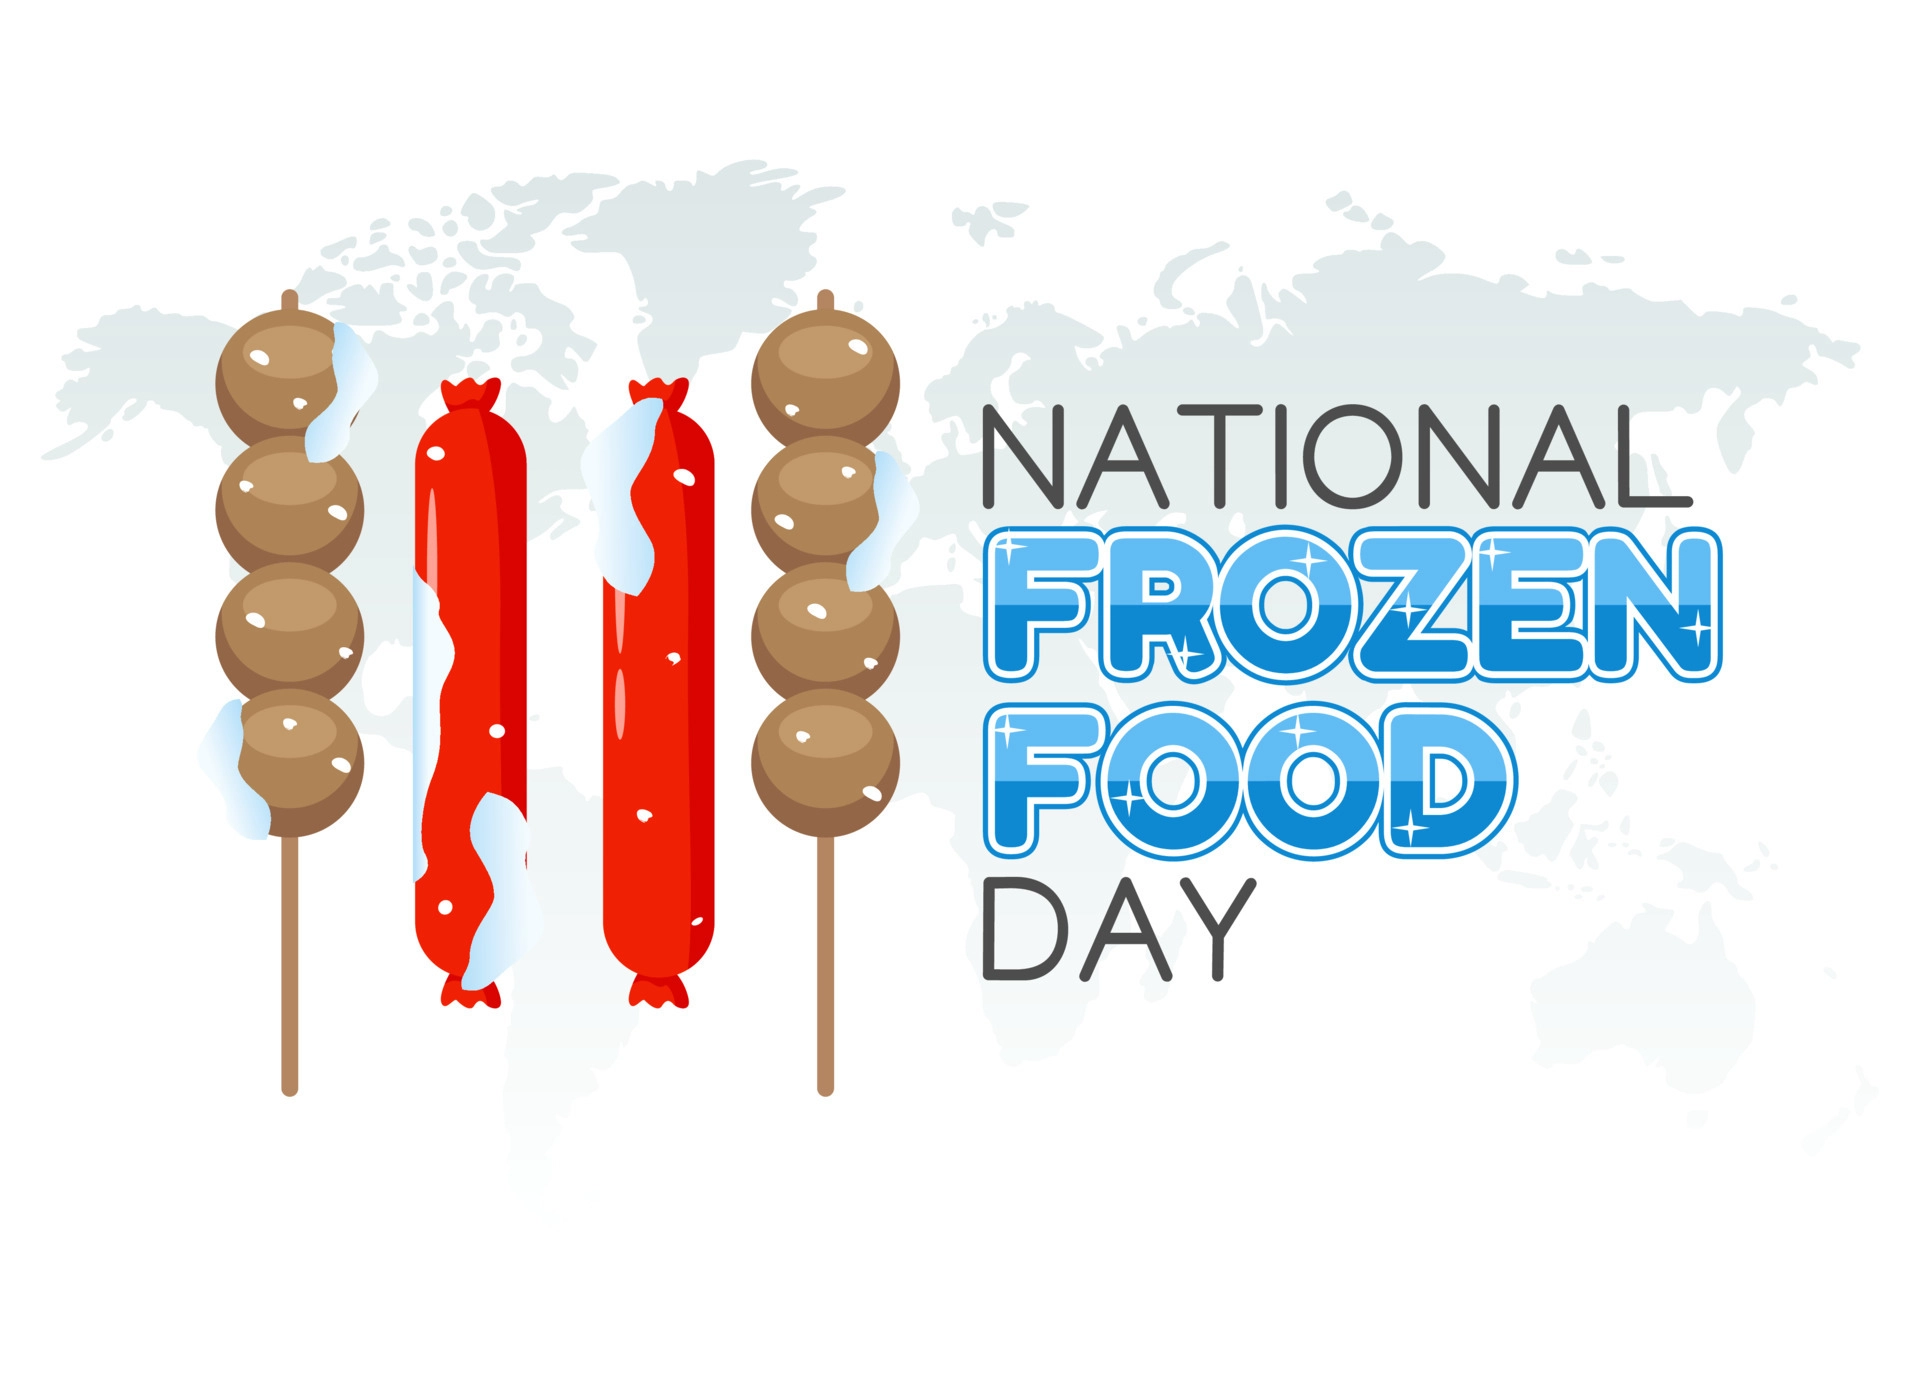 National Frozen Food Day